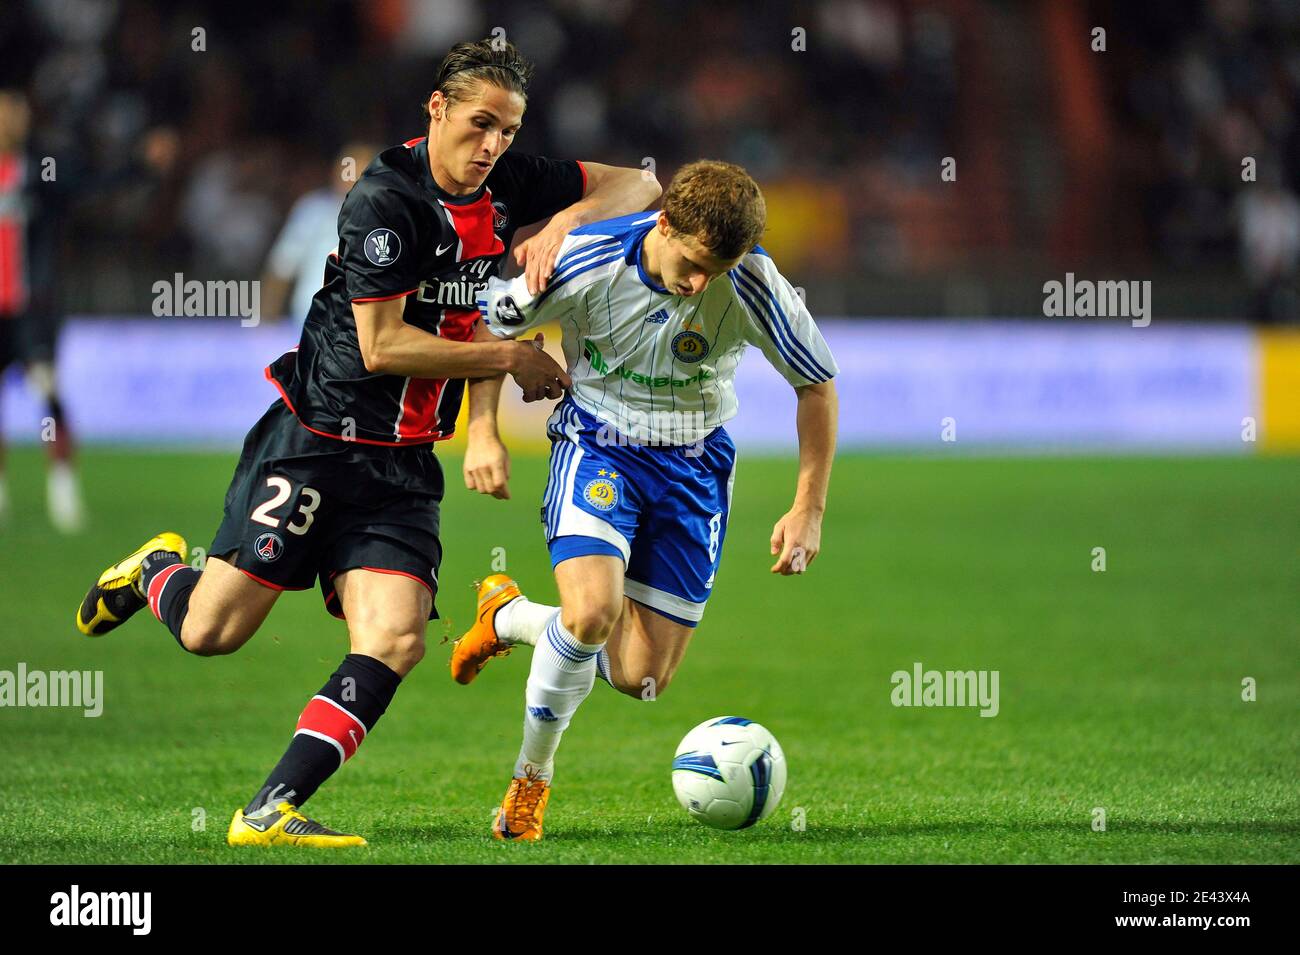 Jeremy Clement of Paris Saint Germain fights for the ball with Olexandr Aliyev of Dynamo Kyiv during the UEFA Cup quarter-finals match played in Parc des Princes stadium, Paris, France, 9 April 2009. Photo by Stephane Reix/ABACAPRESS.COM Stock Photo